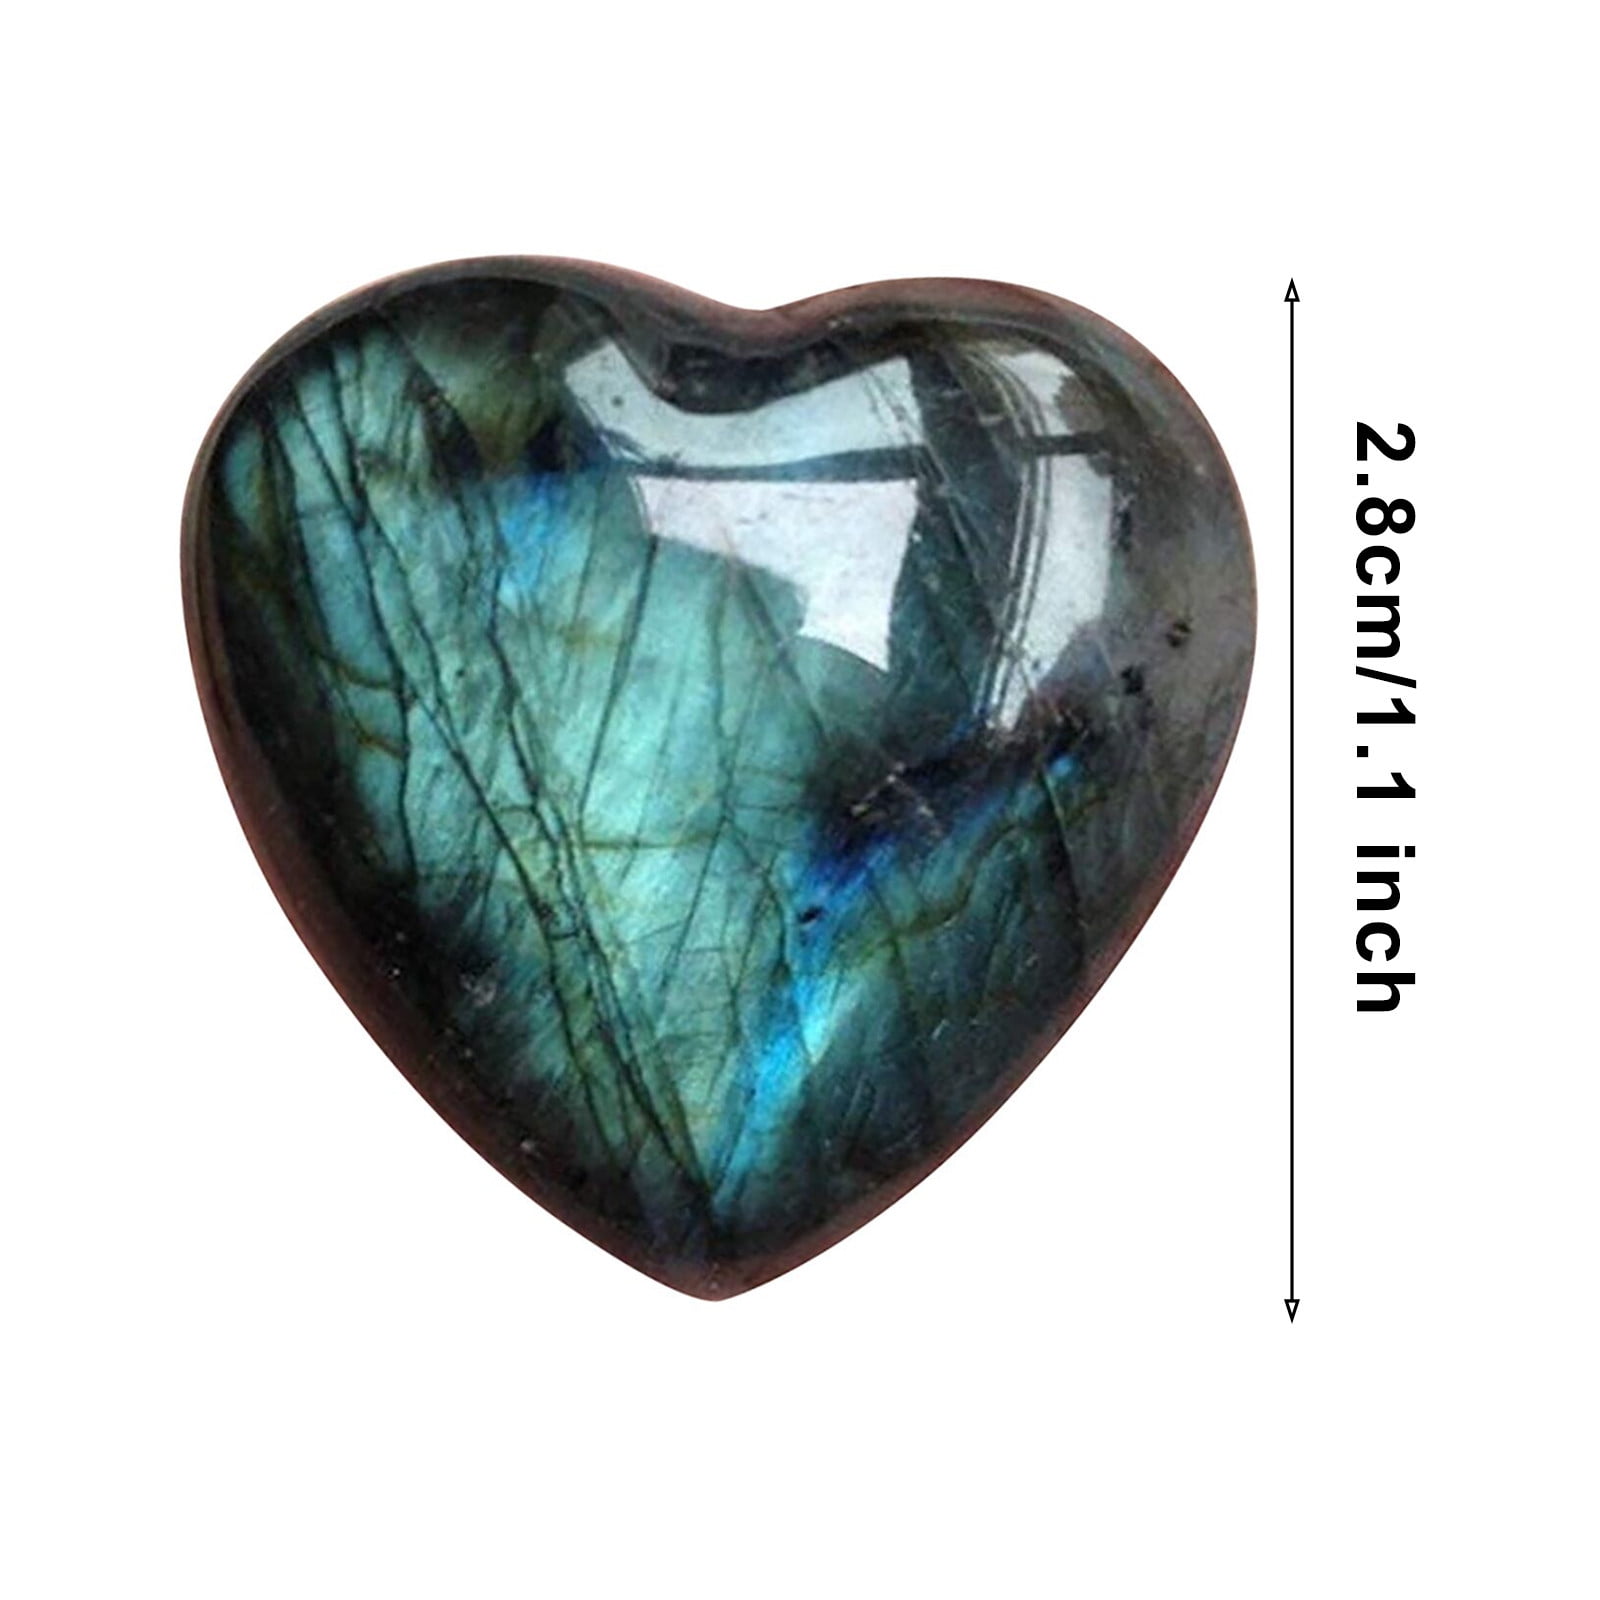 Stunning heart shaped labradorite palm stone  you pick out of A,B or D! 